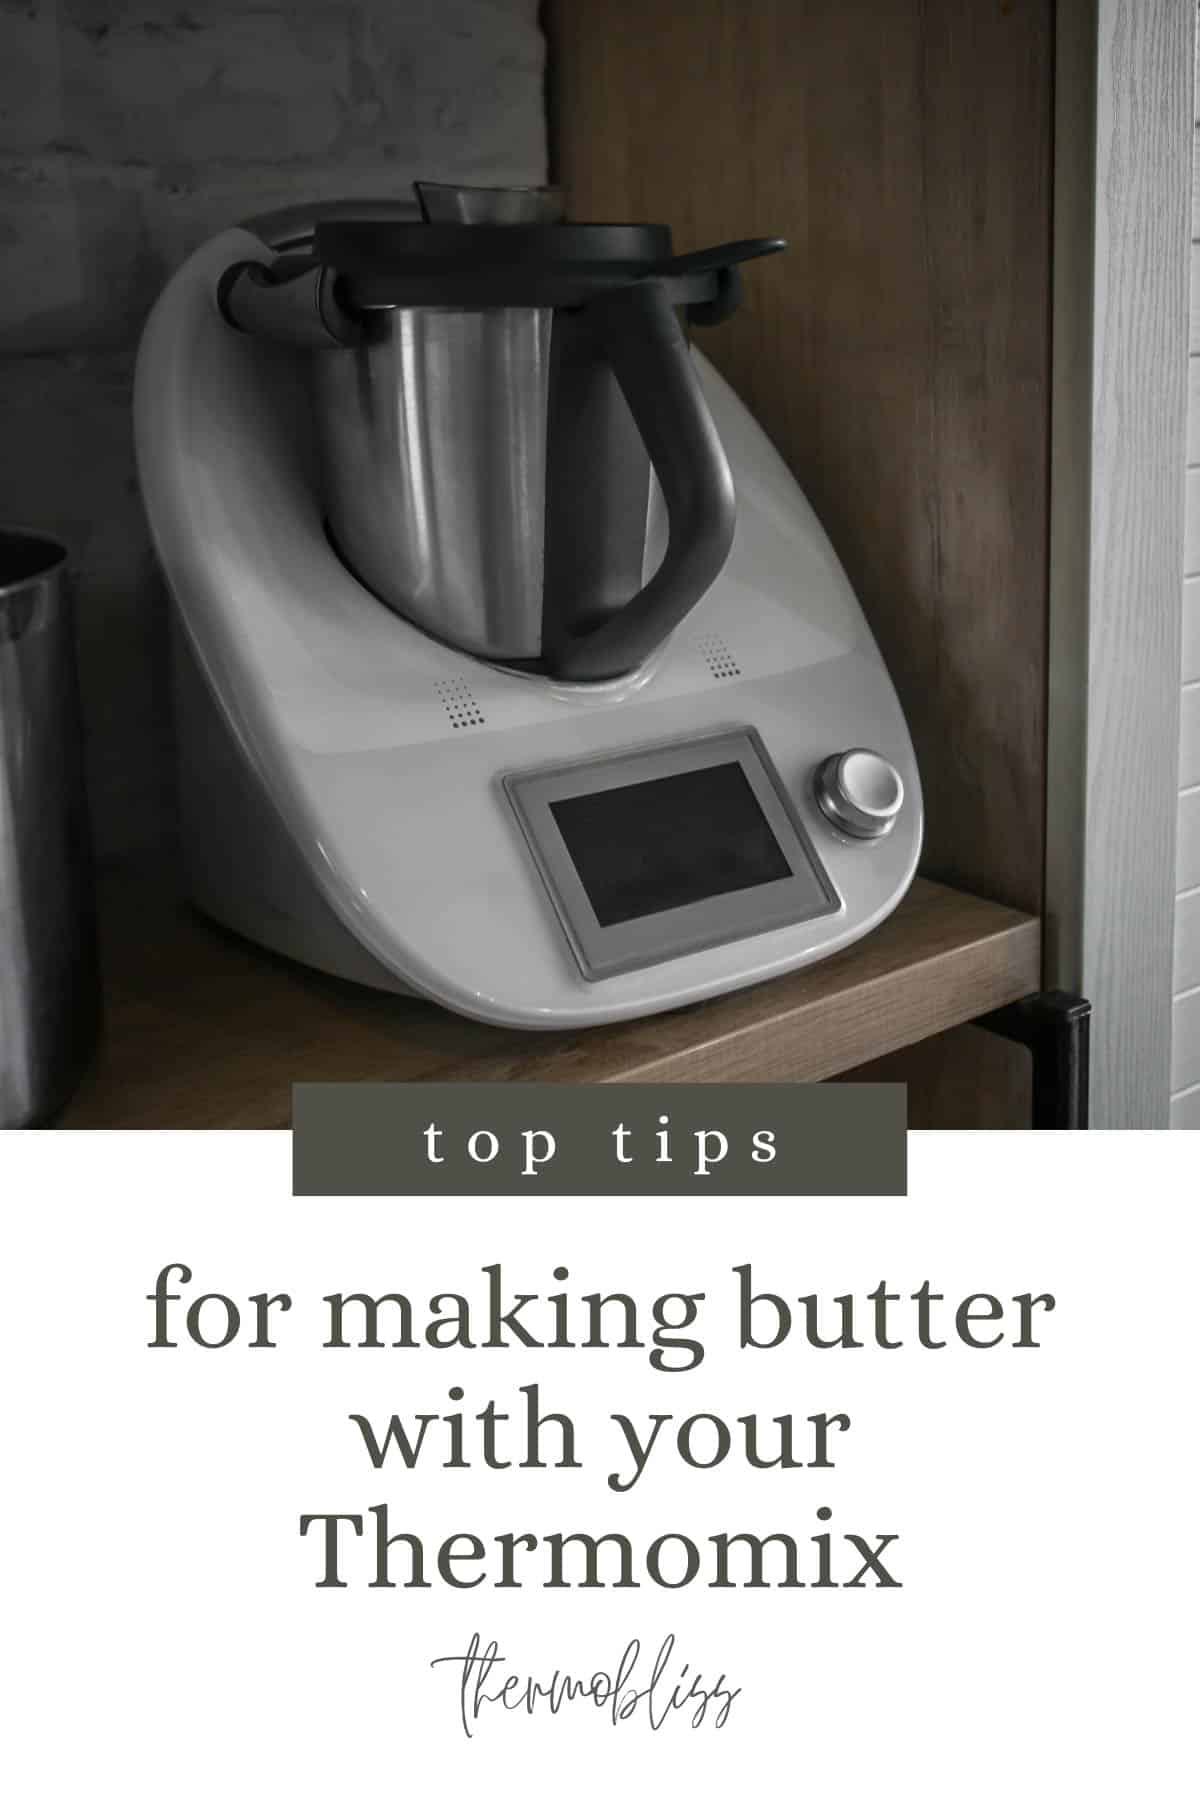 A Thermomix with the text overlay 'Top Tips for Making Butter in a Thermomix'